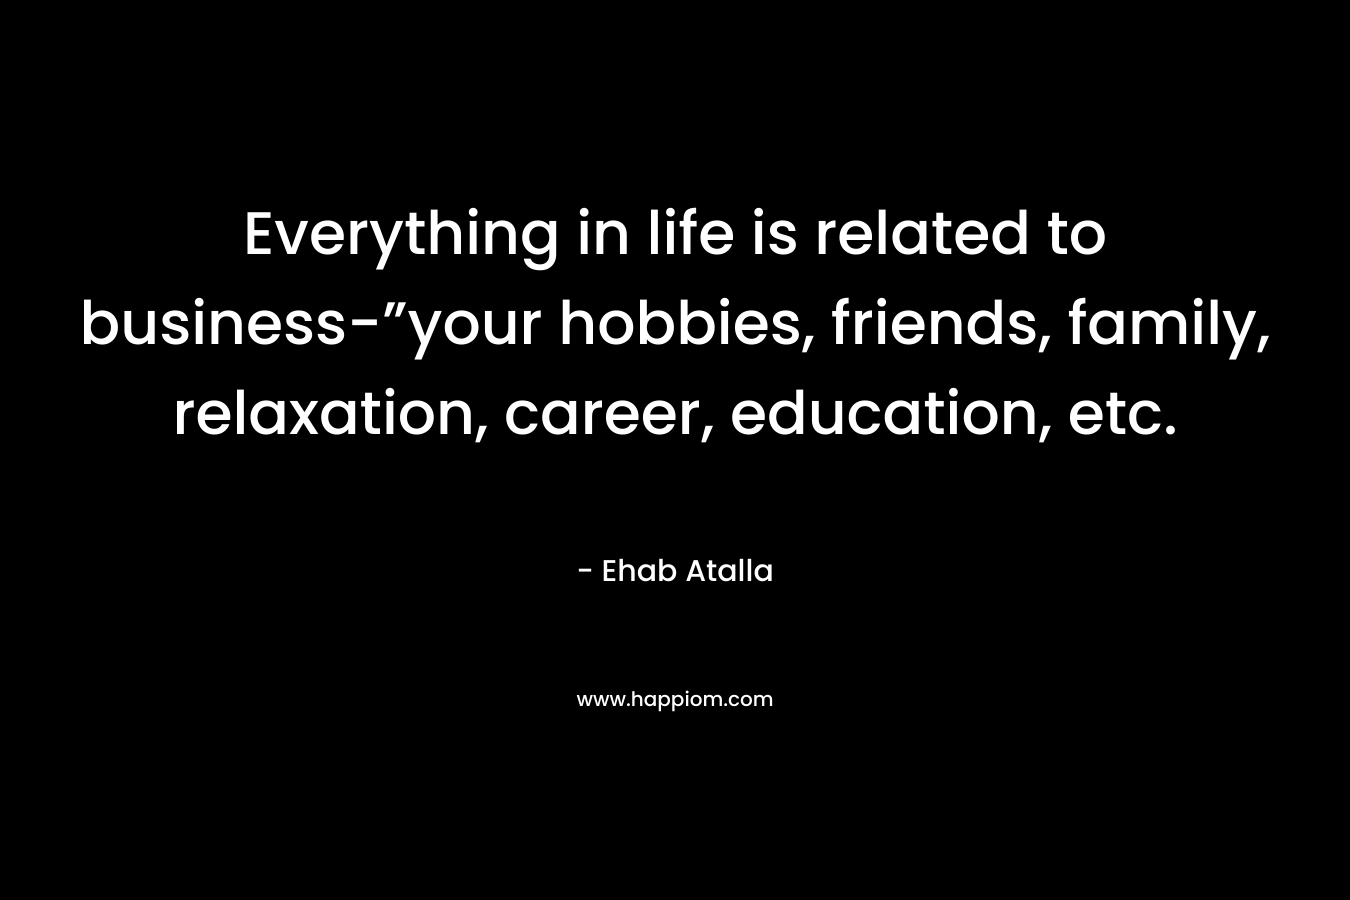 Everything in life is related to business-”your hobbies, friends, family, relaxation, career, education, etc.